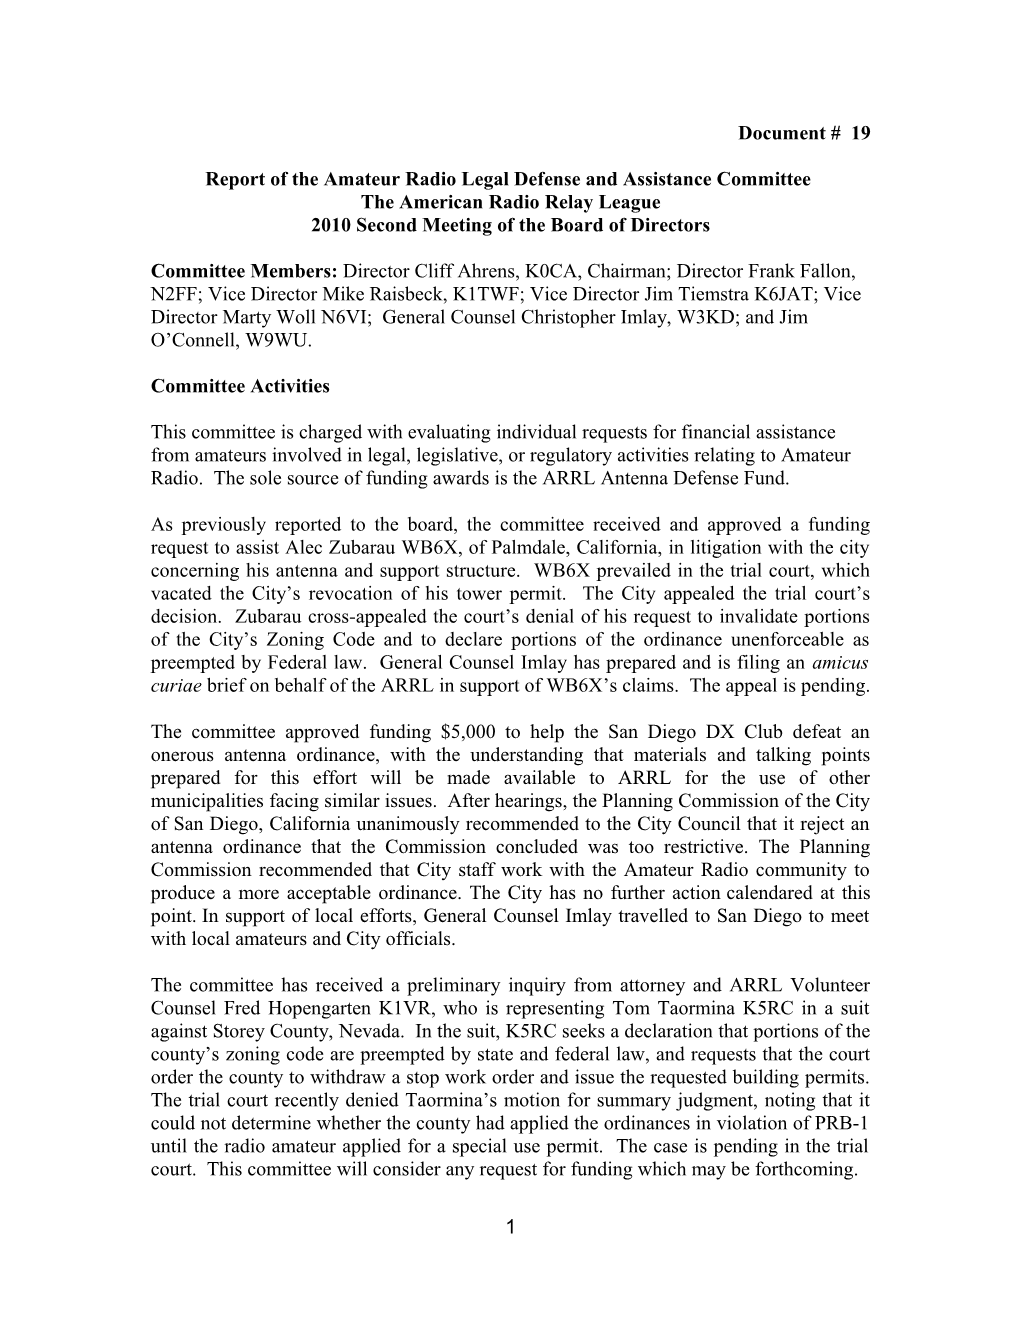 Report of the Amateur Radio Legal Defense and Assistance Committee